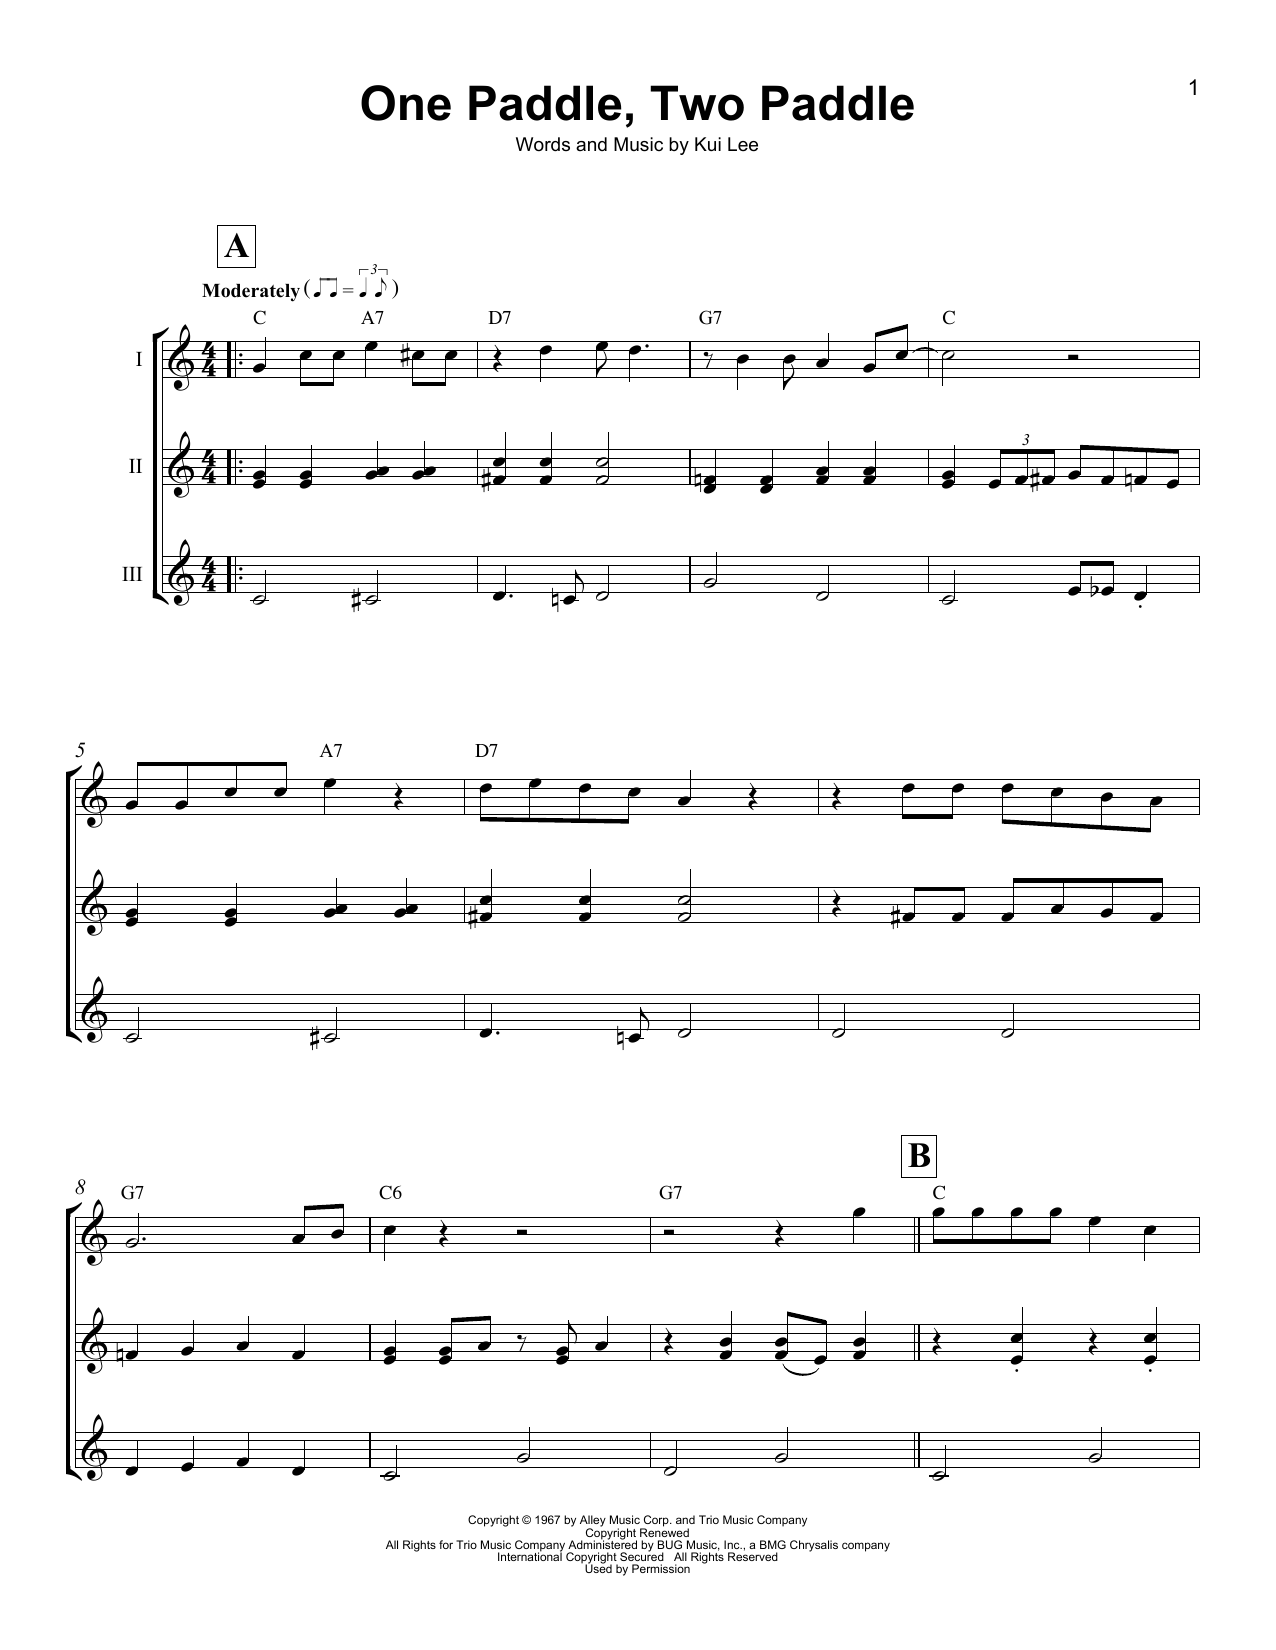 Download Kui Lee One Paddle, Two Paddle Sheet Music